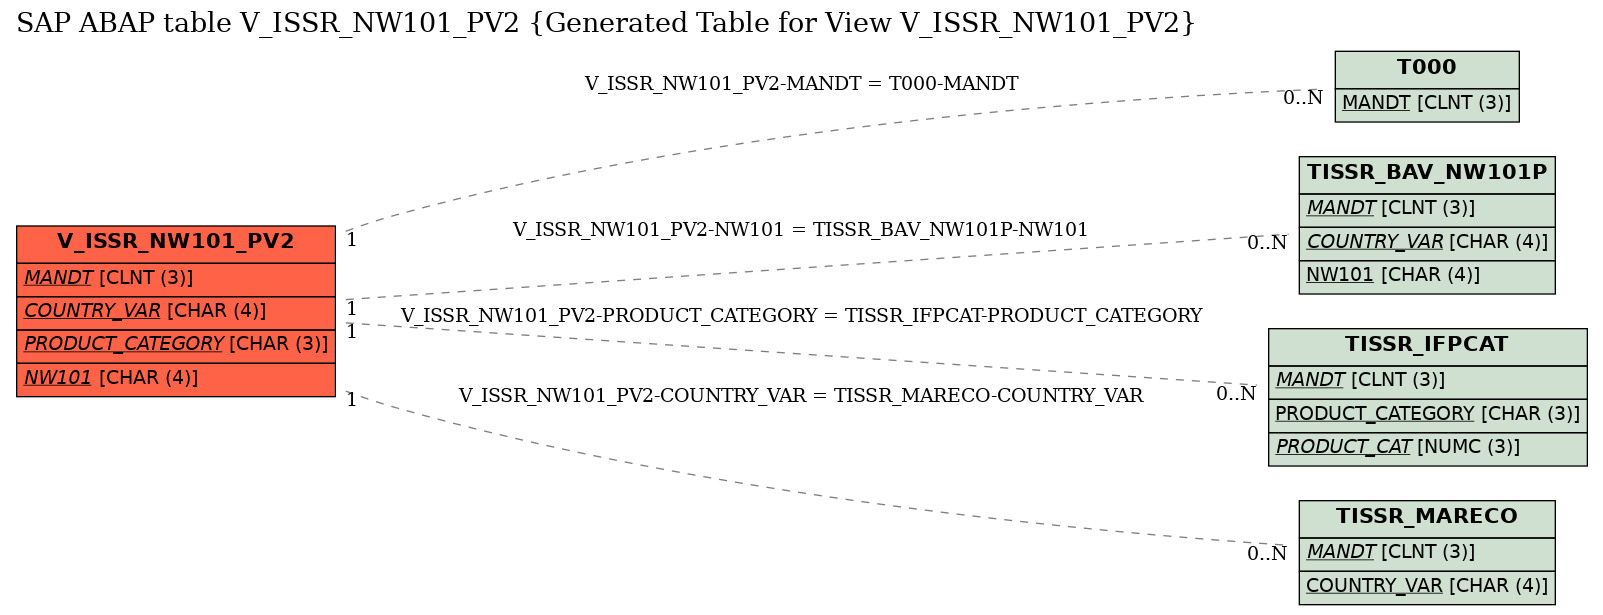 E-R Diagram for table V_ISSR_NW101_PV2 (Generated Table for View V_ISSR_NW101_PV2)